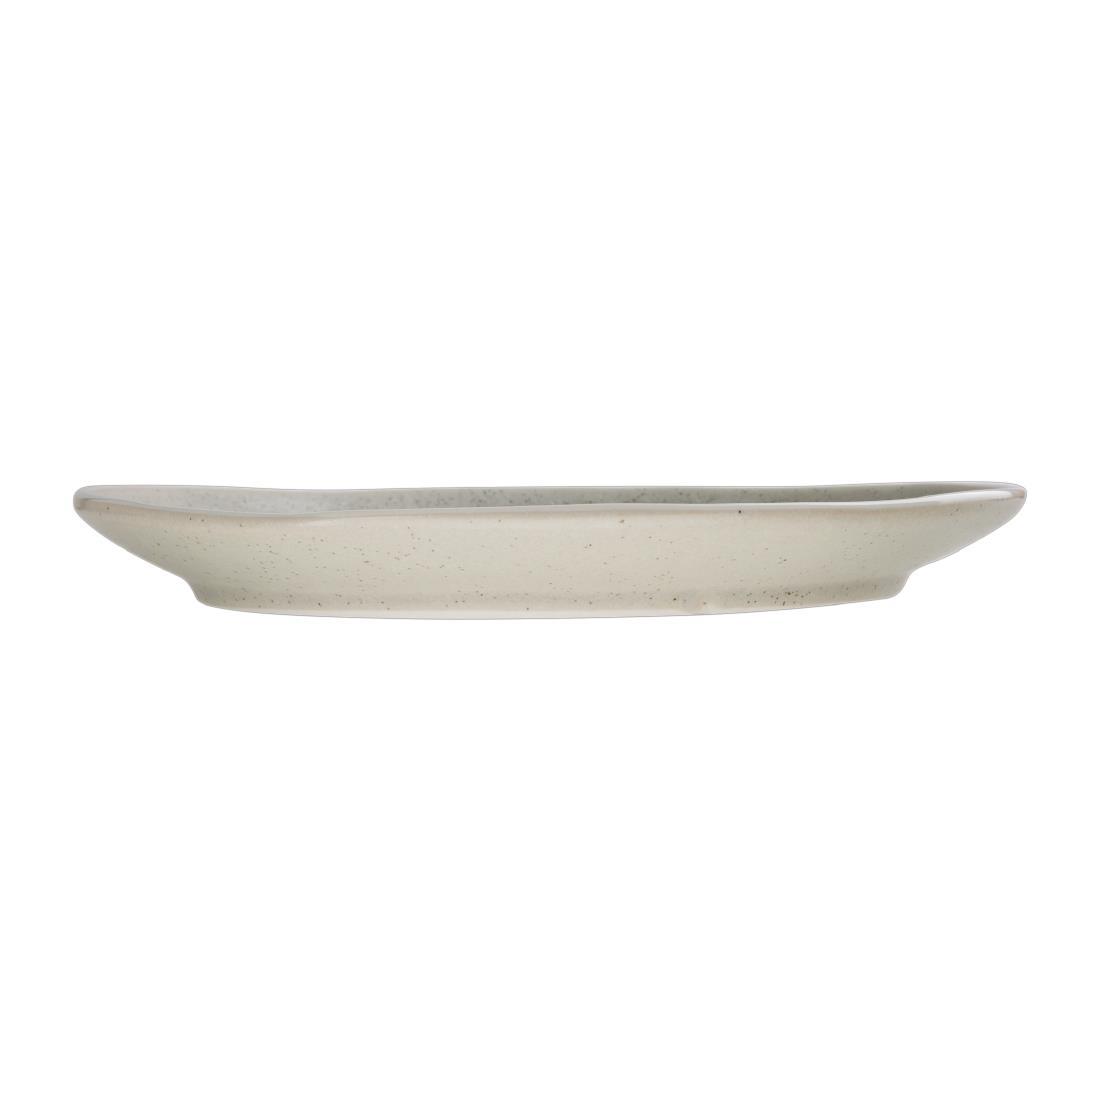 Olympia Chia Plates Sand 270mm (Pack of 6) - DR807  - 4